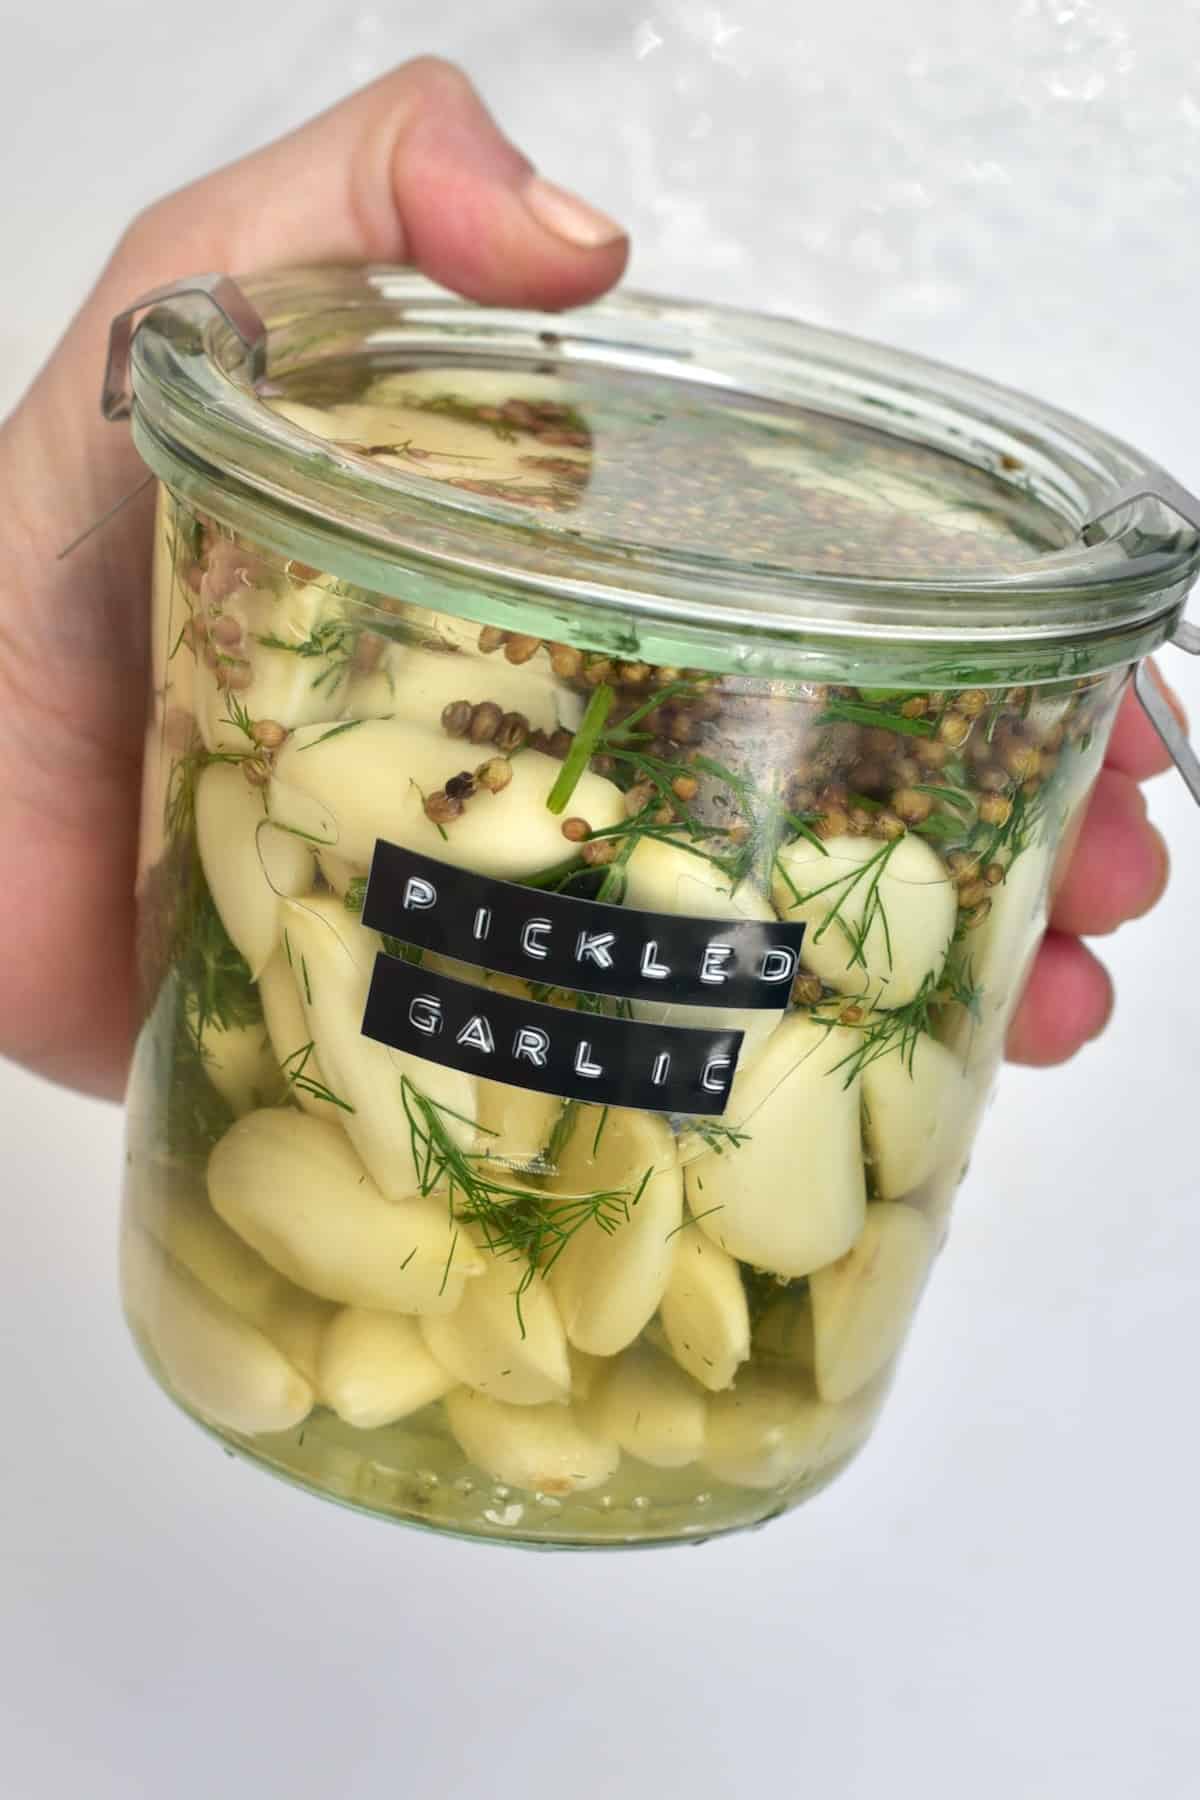 A jar with homemade pickled garlic